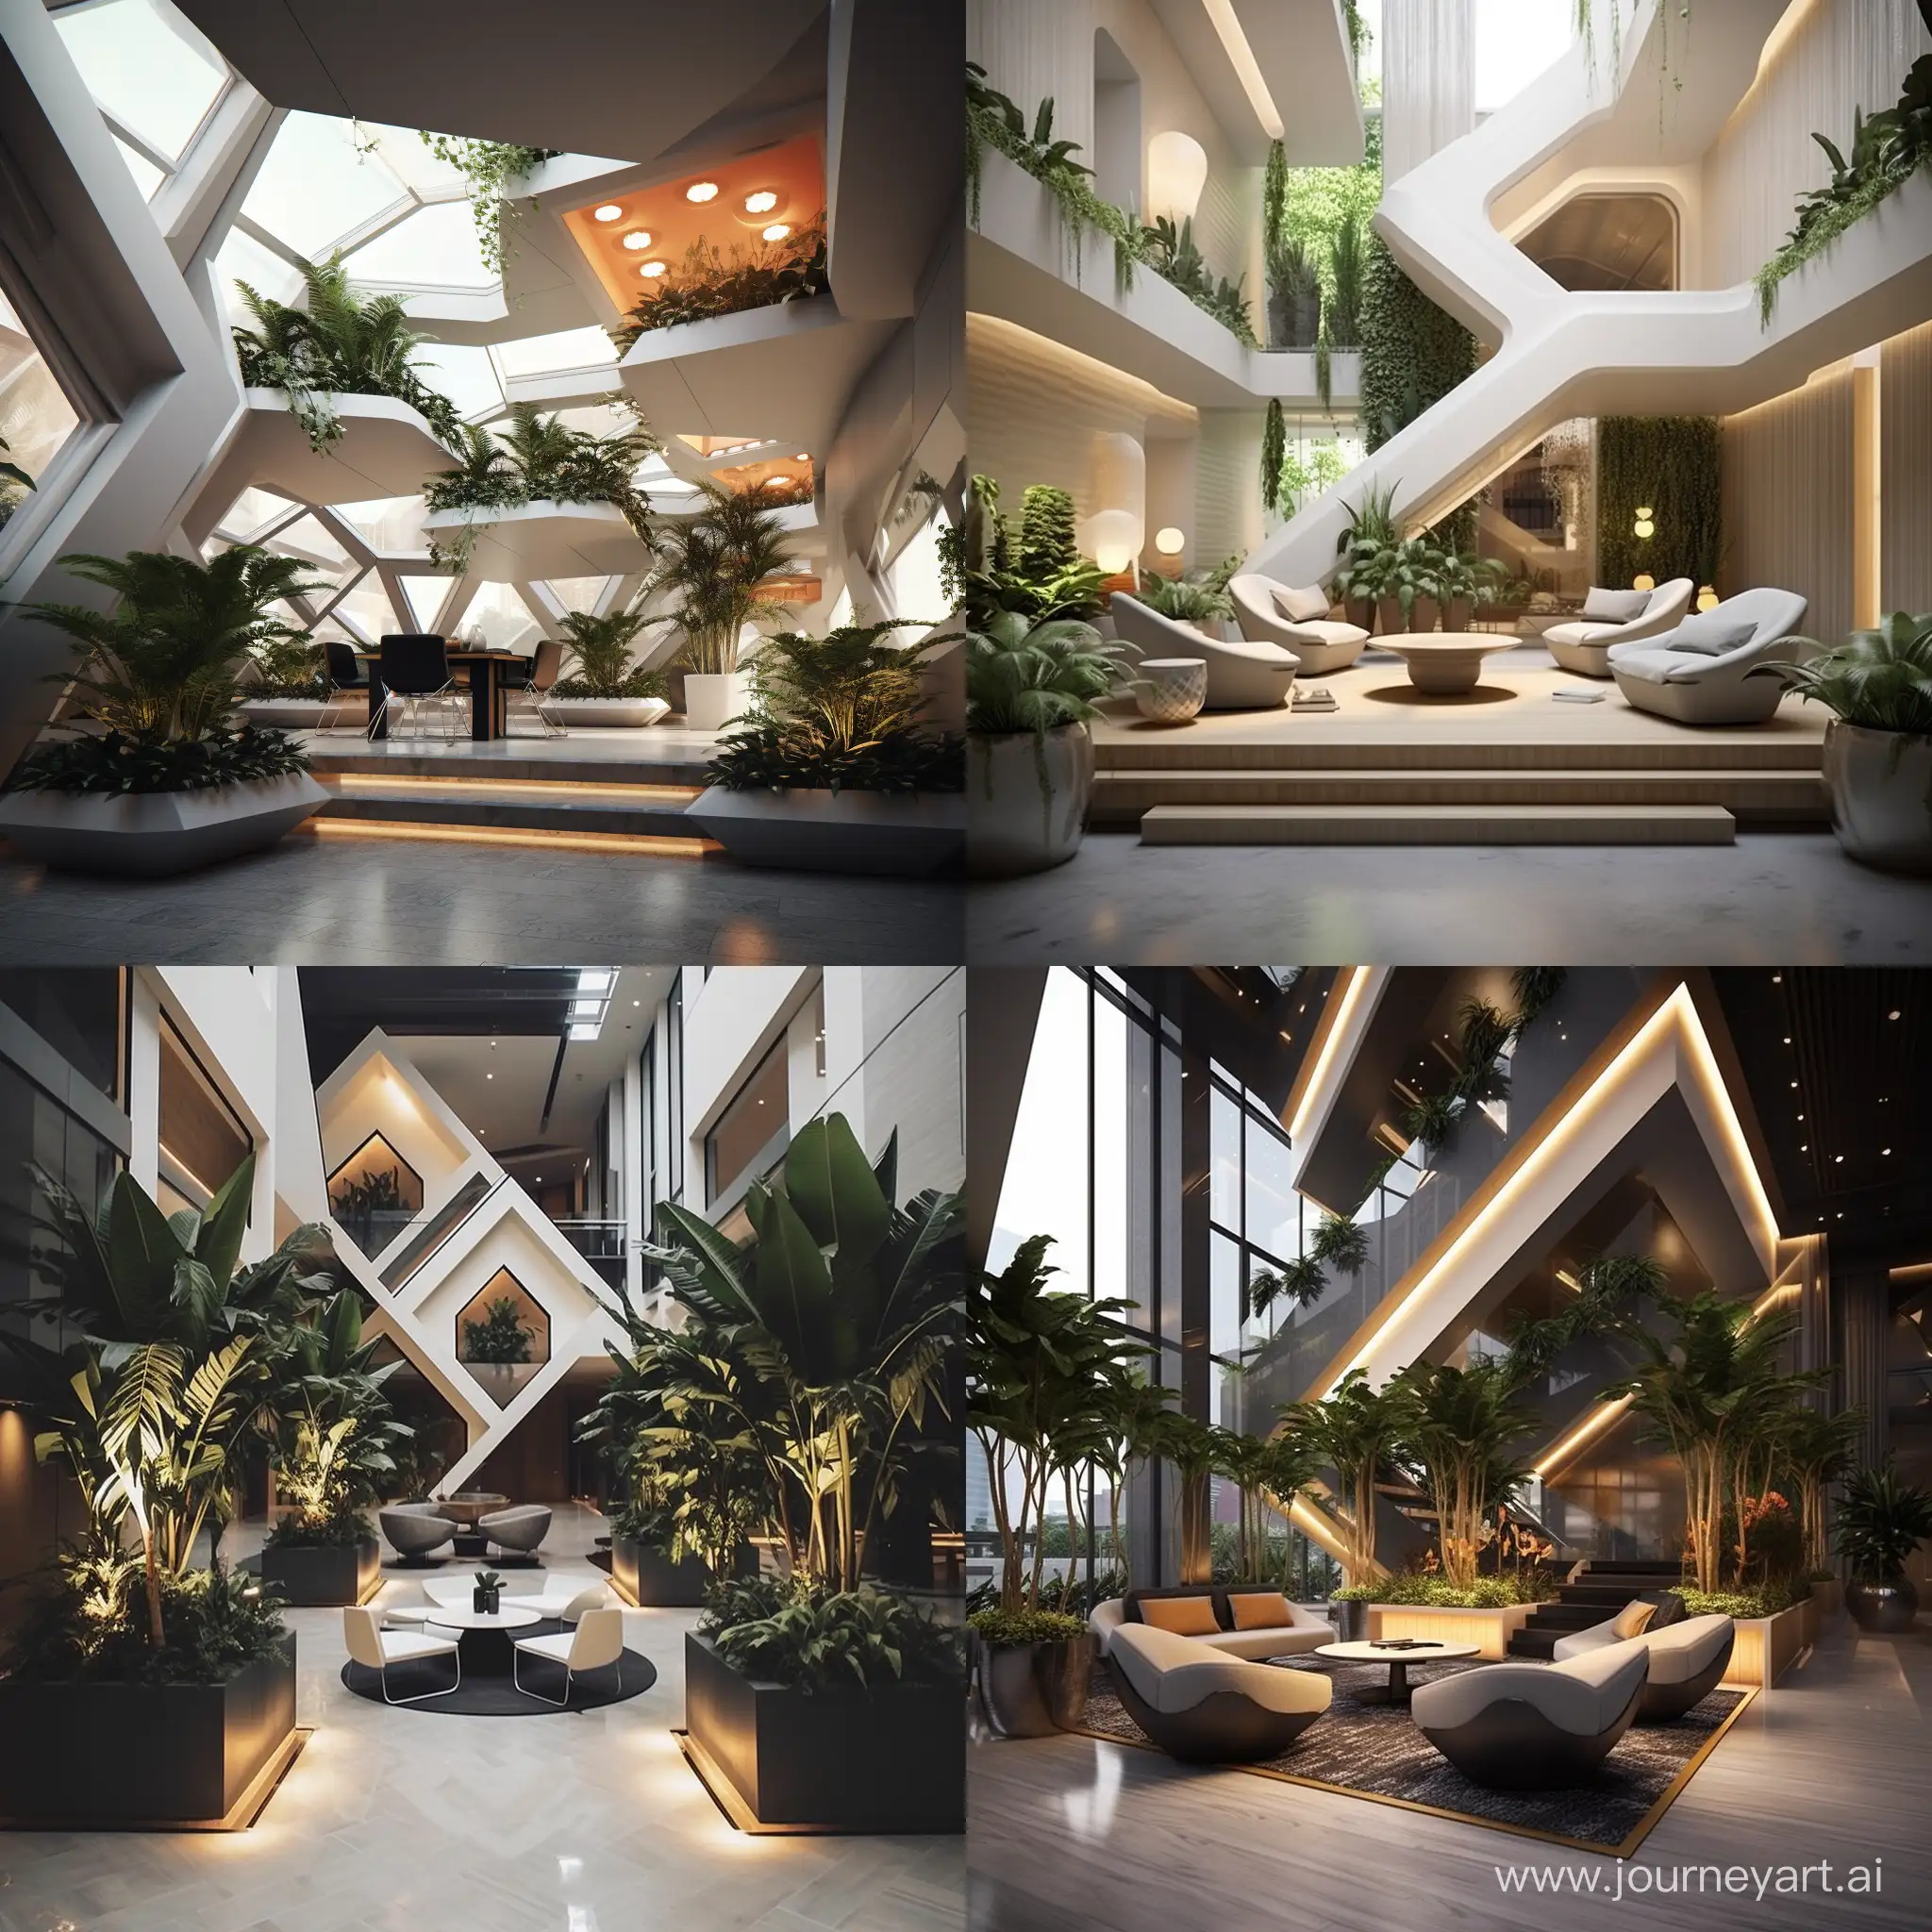 Design a modern and futuristic atrium with sleek planters, geometric plant arrangements, and innovative lighting. Use plants with interesting shapes and textures to create a contemporary and cutting-edge vibe. four floor high small buiding 